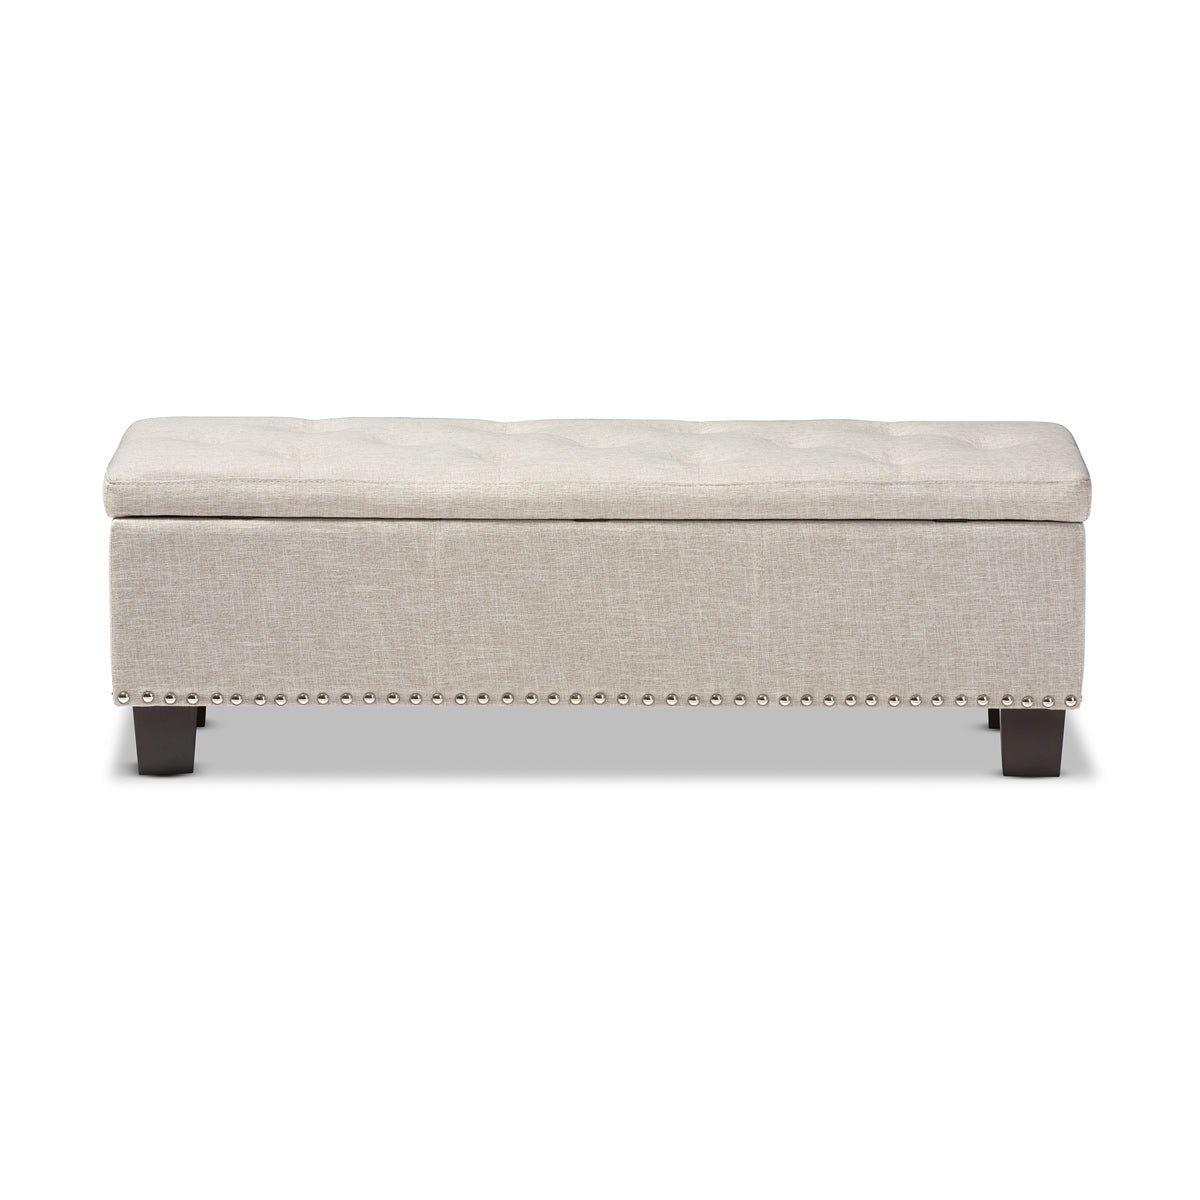 Baxton Studio Hannah Modern and Contemporary Beige Fabric Upholstered Button-Tufting Storage Ottoman Bench Baxton Studio-benches-Minimal And Modern - 6